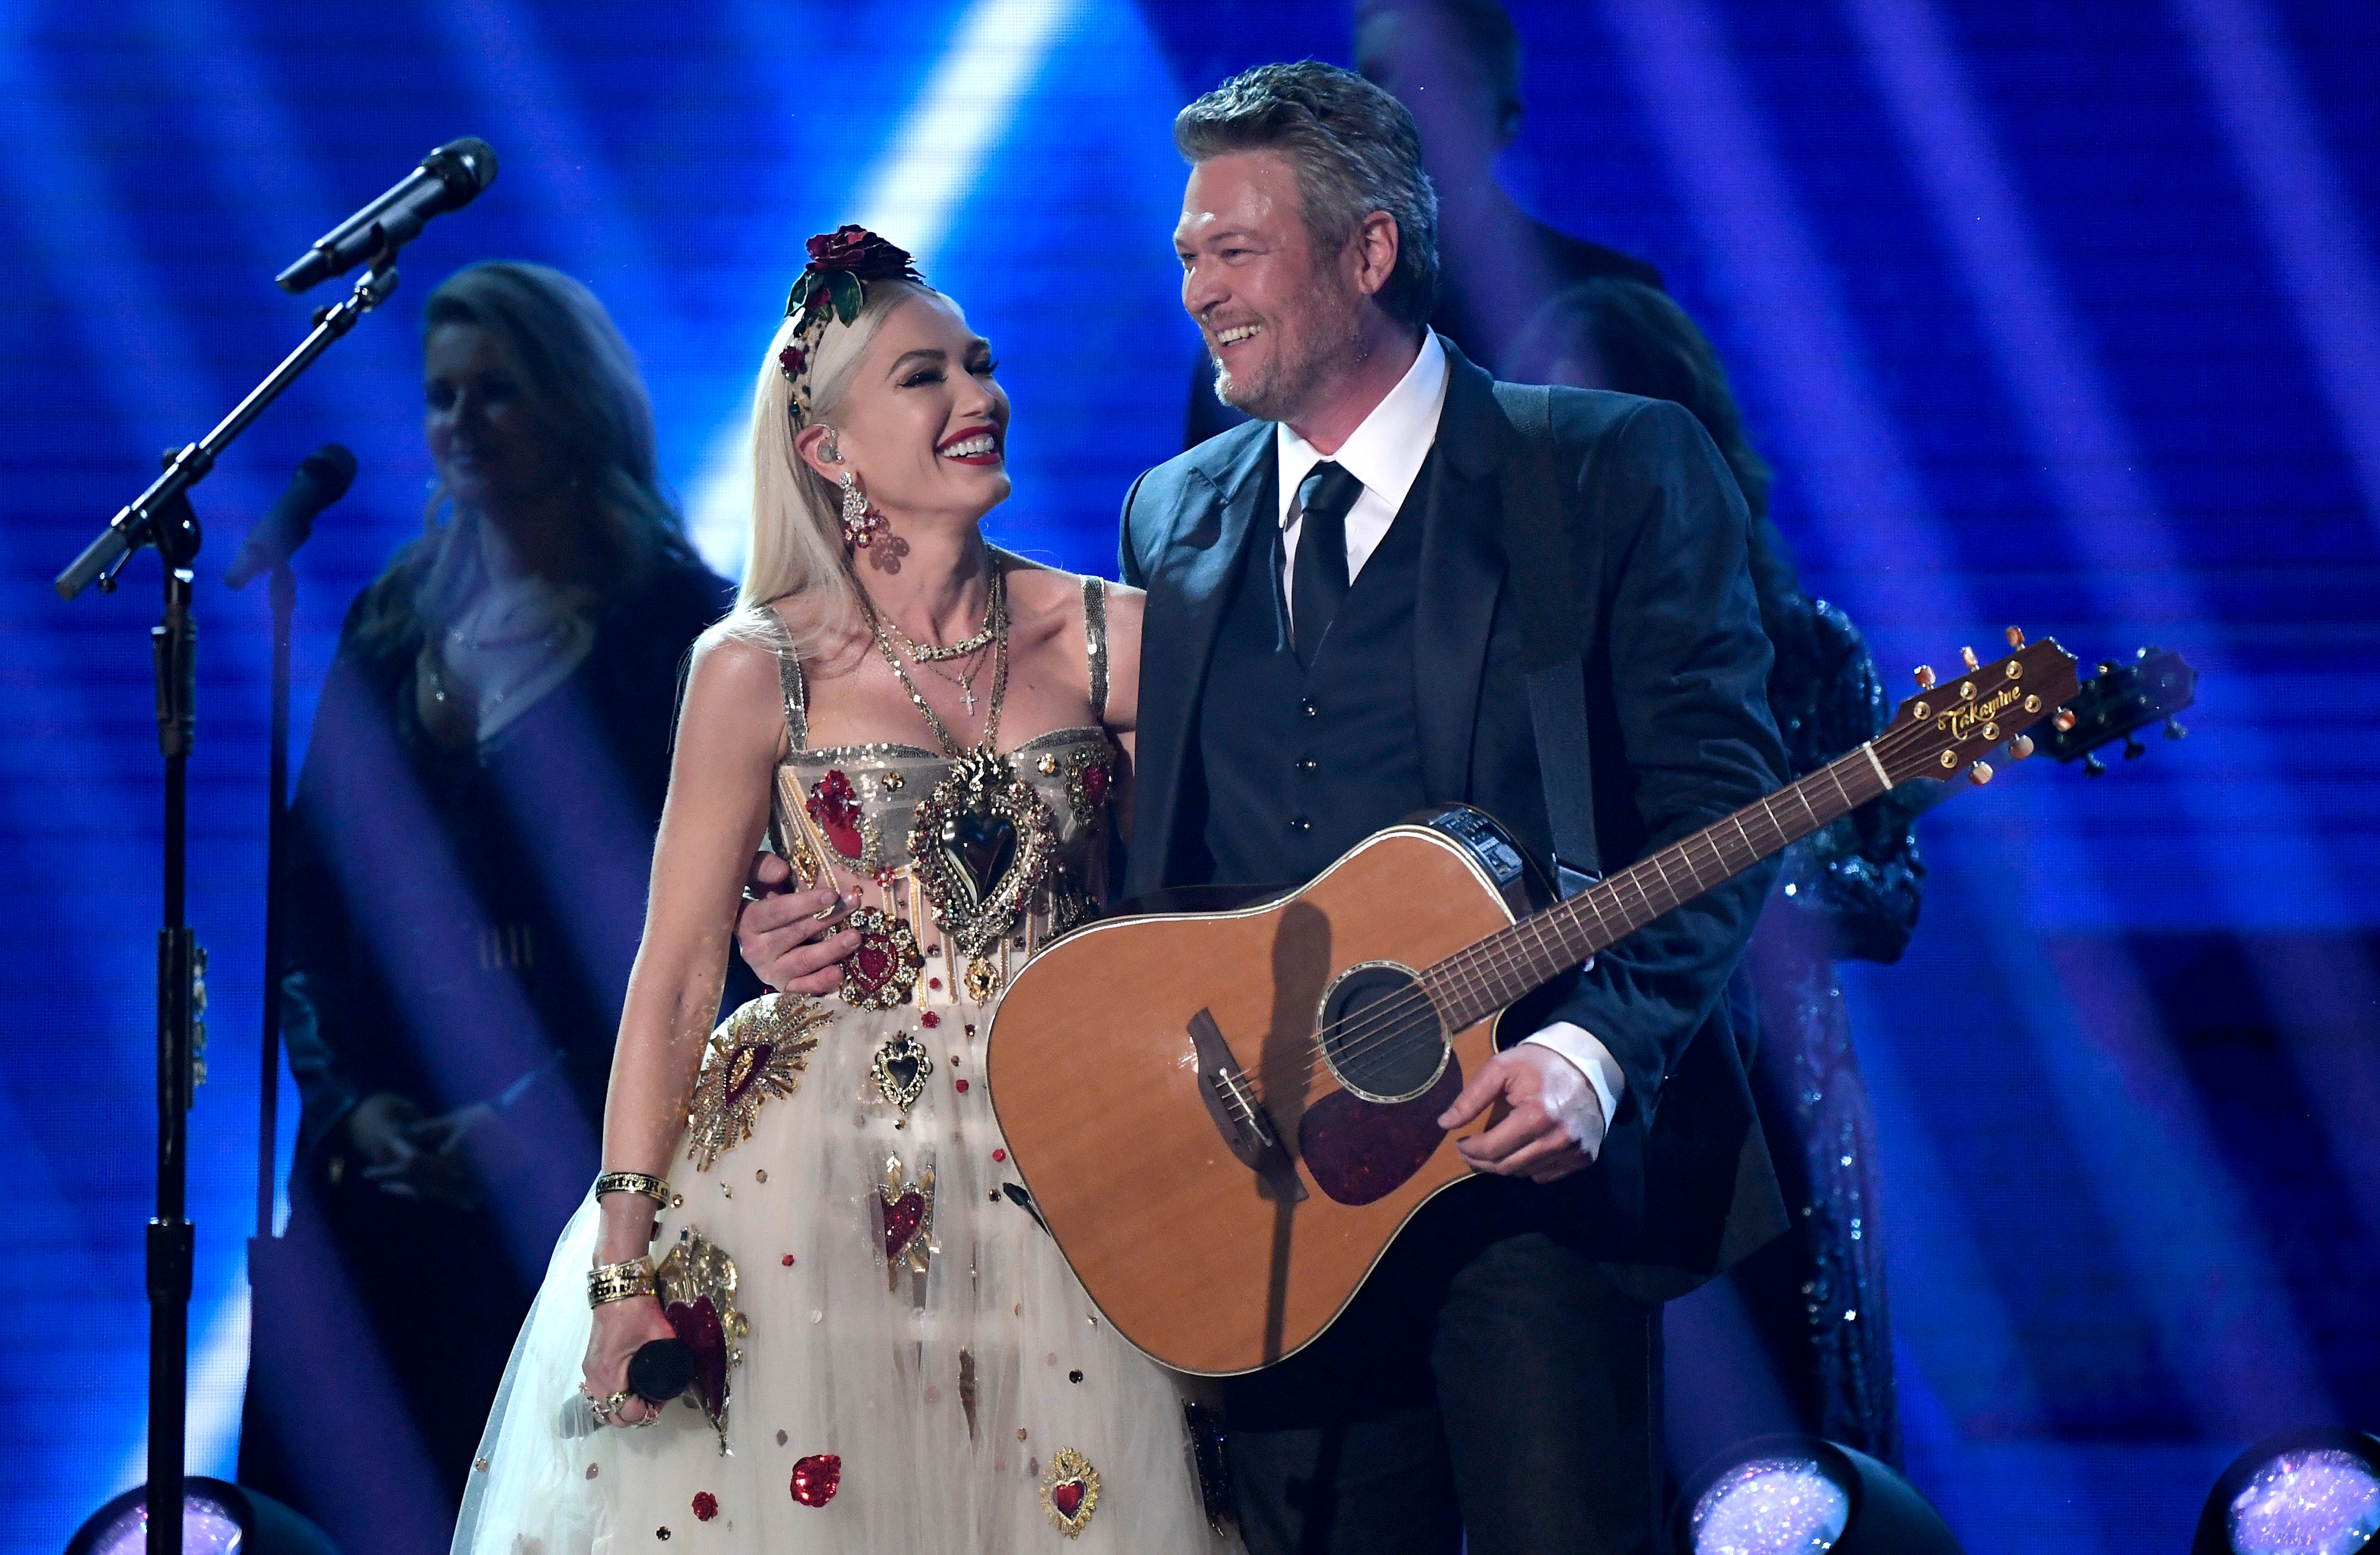 File: Gwen Stefani and Blake Shelton perform onstage during the 62nd Annual Grammy Awards at the Staples Center in Los Angeles, California